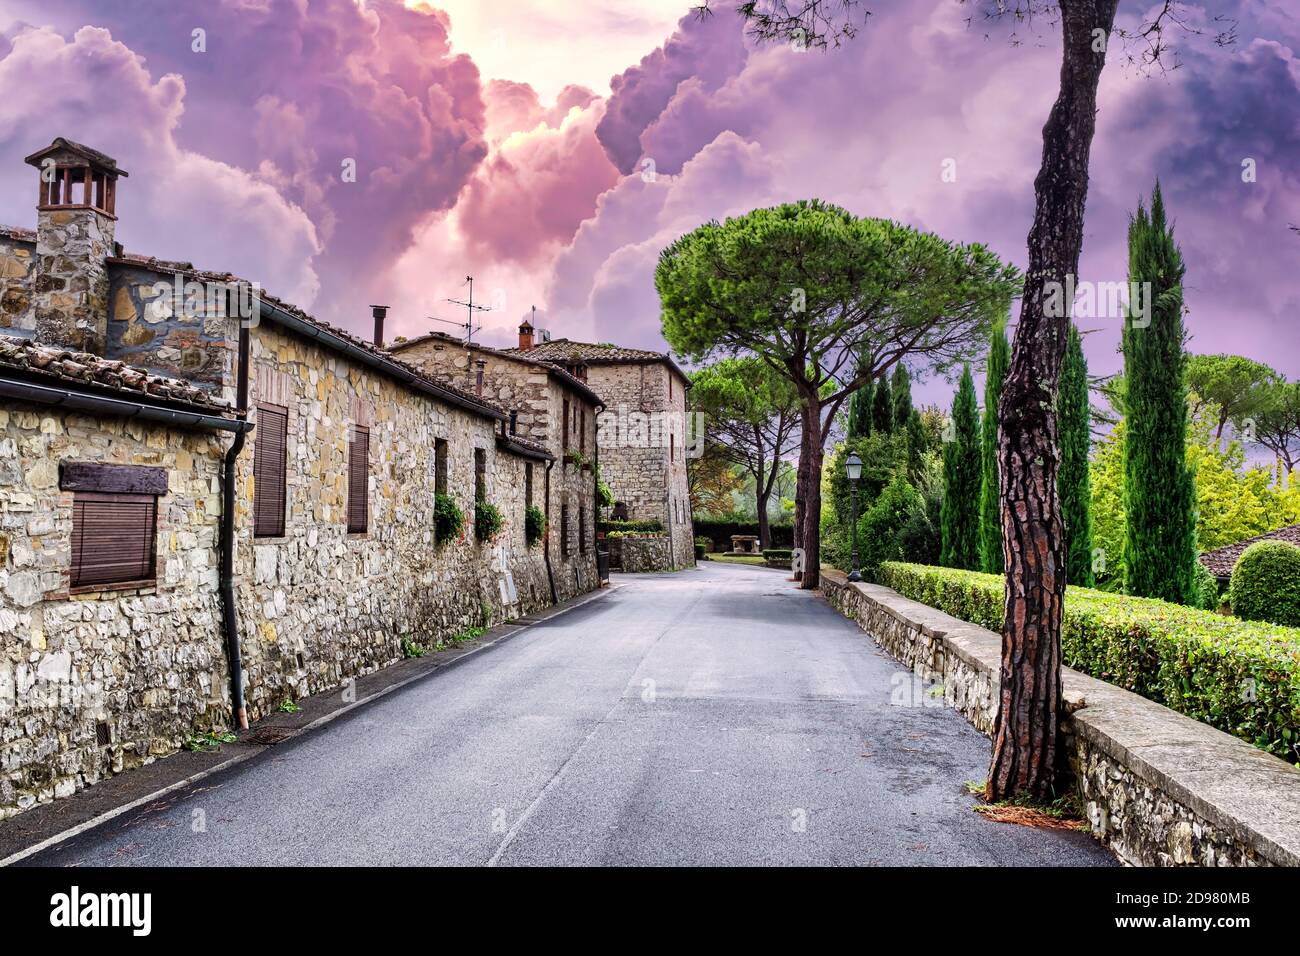 Epic storm clouds over San Sano village in Tuscany Italy. Stock Photo